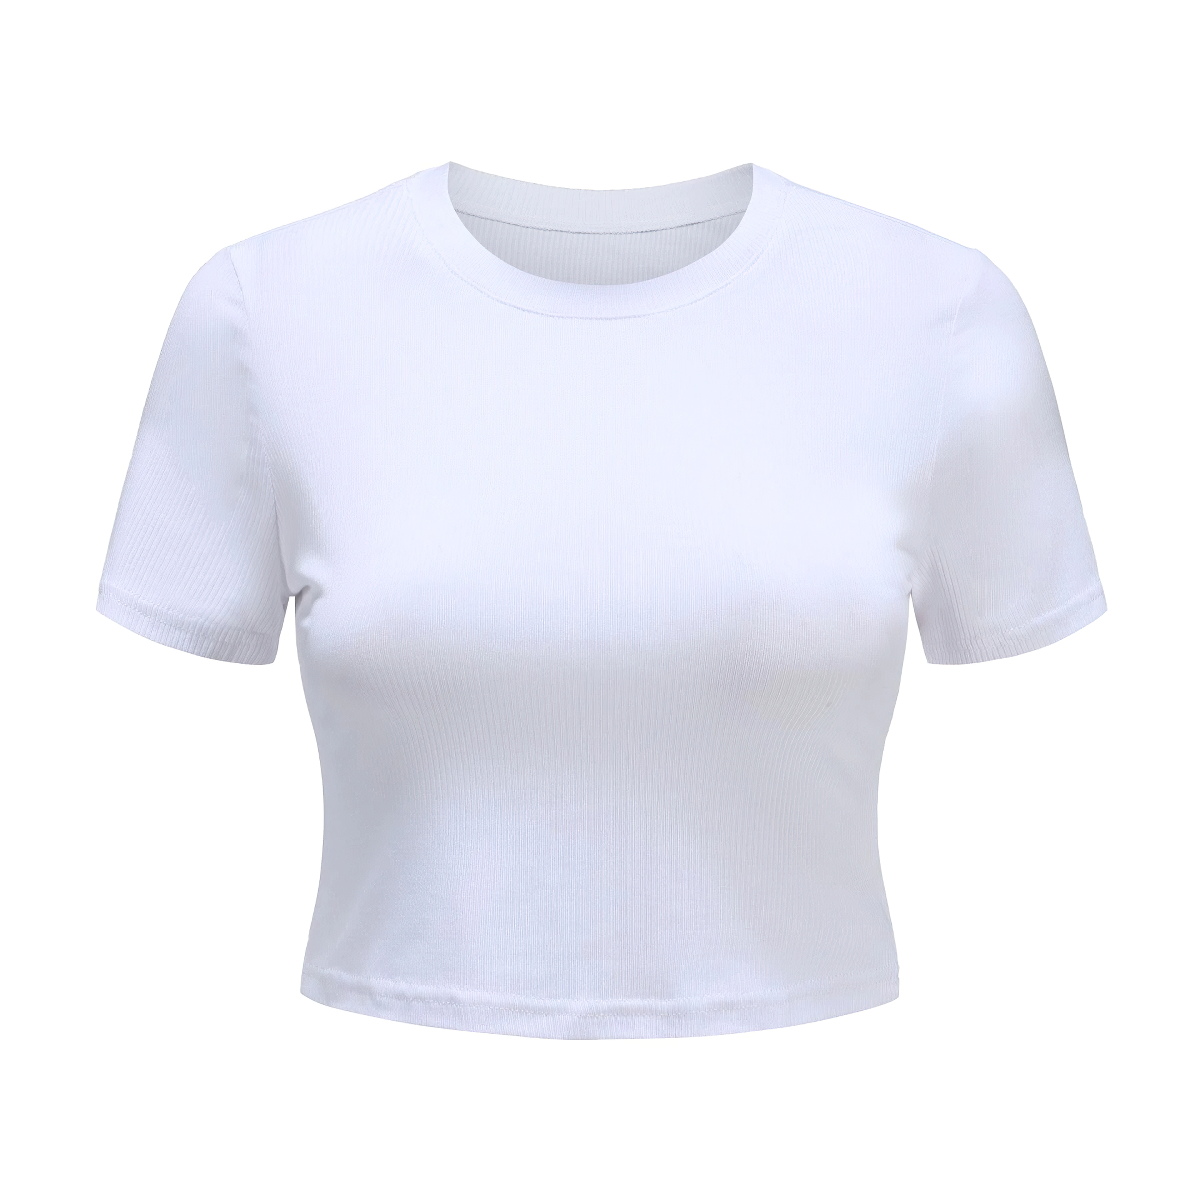 Women's O-Neck Knit Crop Top / Sexy Summer Casual T-Shirt with Short Sleeve - HARD'N'HEAVY